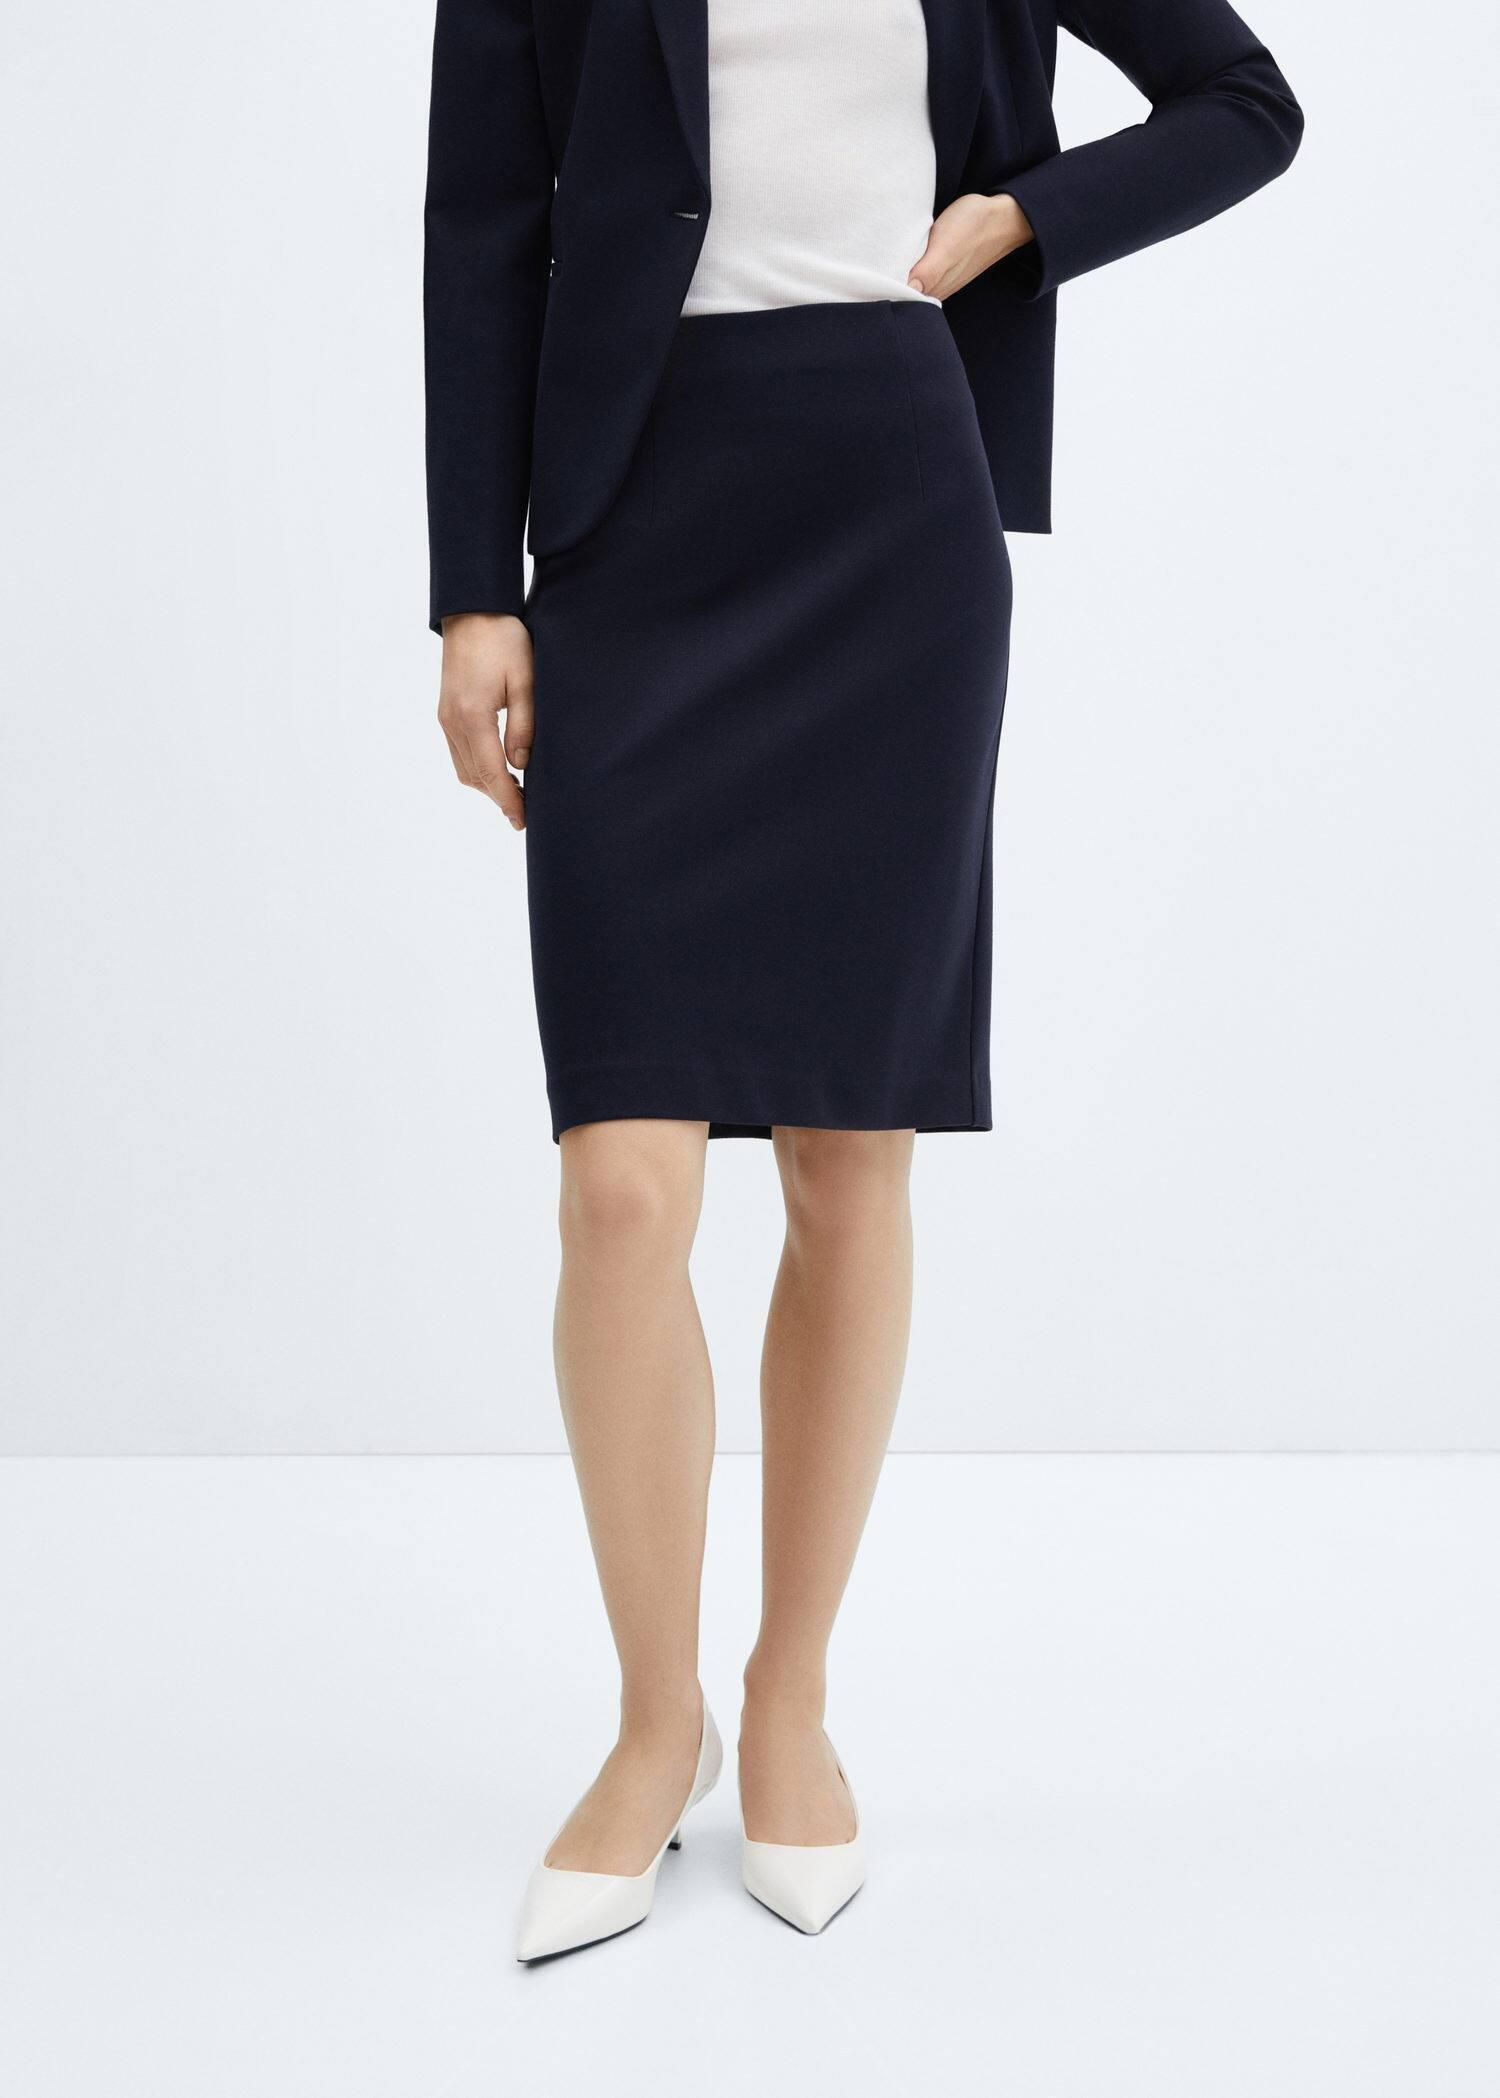 Mango - Navy Pencil Skirt With Rome-Knit Opening